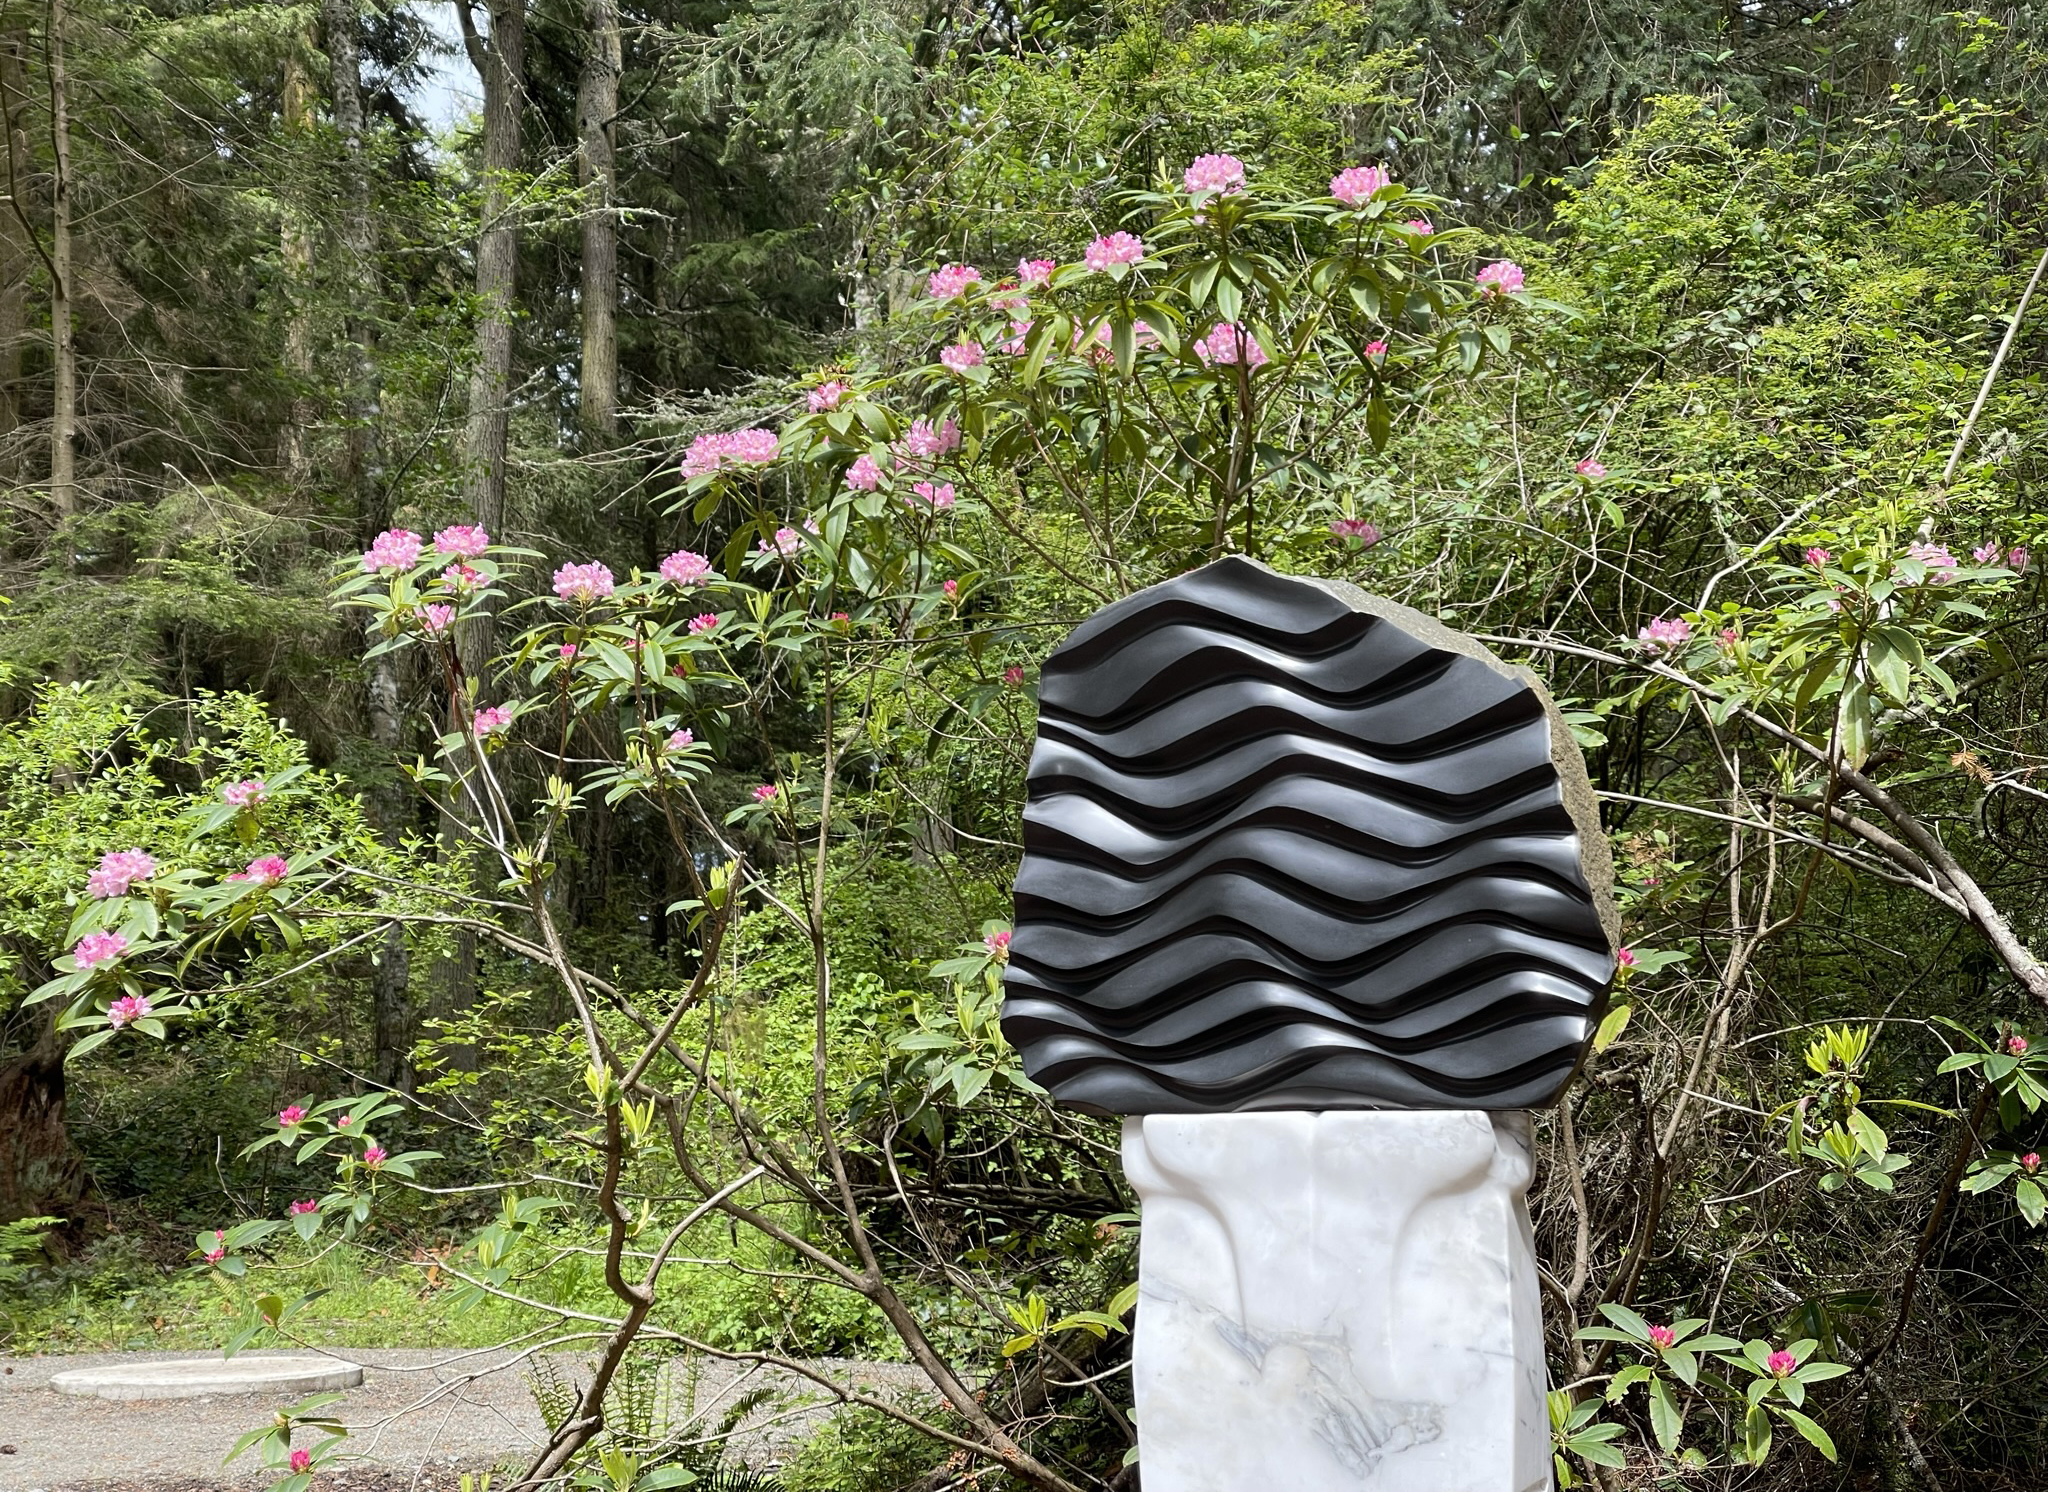 We Are Water by Sue Taves with blooming rhododendrons at Price Sculpture Forest